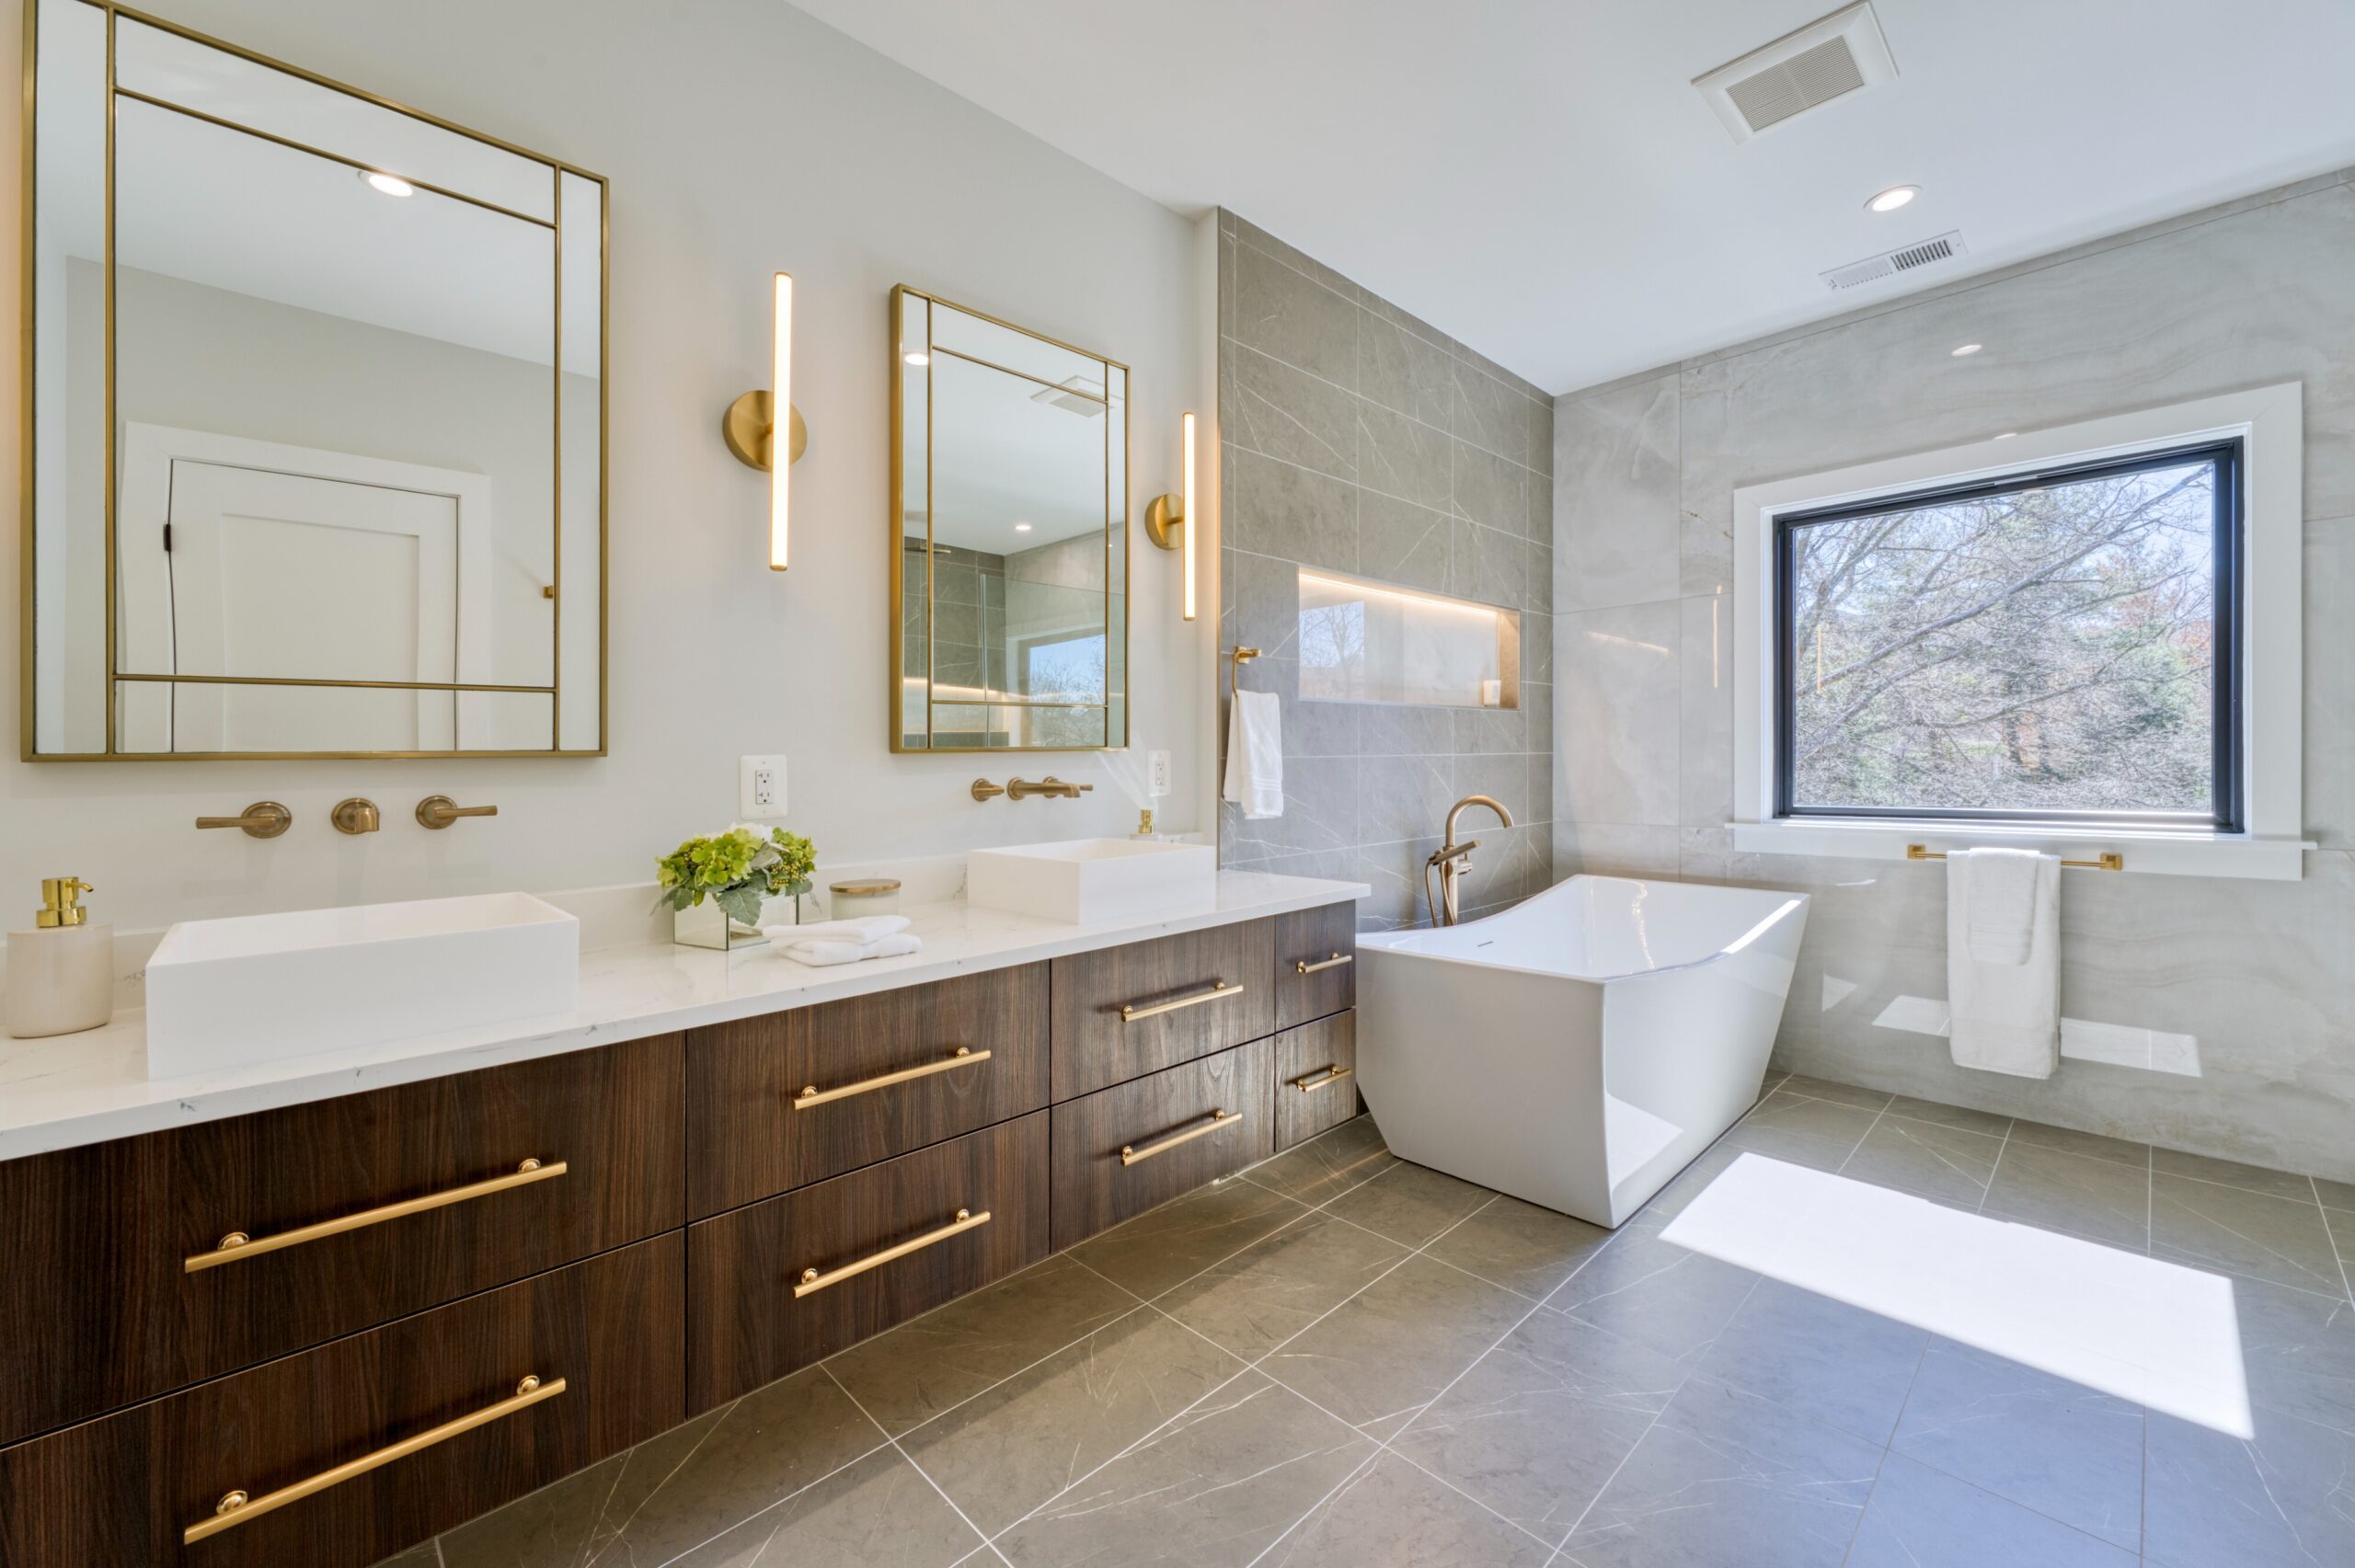 Professional interior photo of Custom New Home 1416 S Greenbrier St - showing the primary bathroom with designer dual vanities and soaking tub